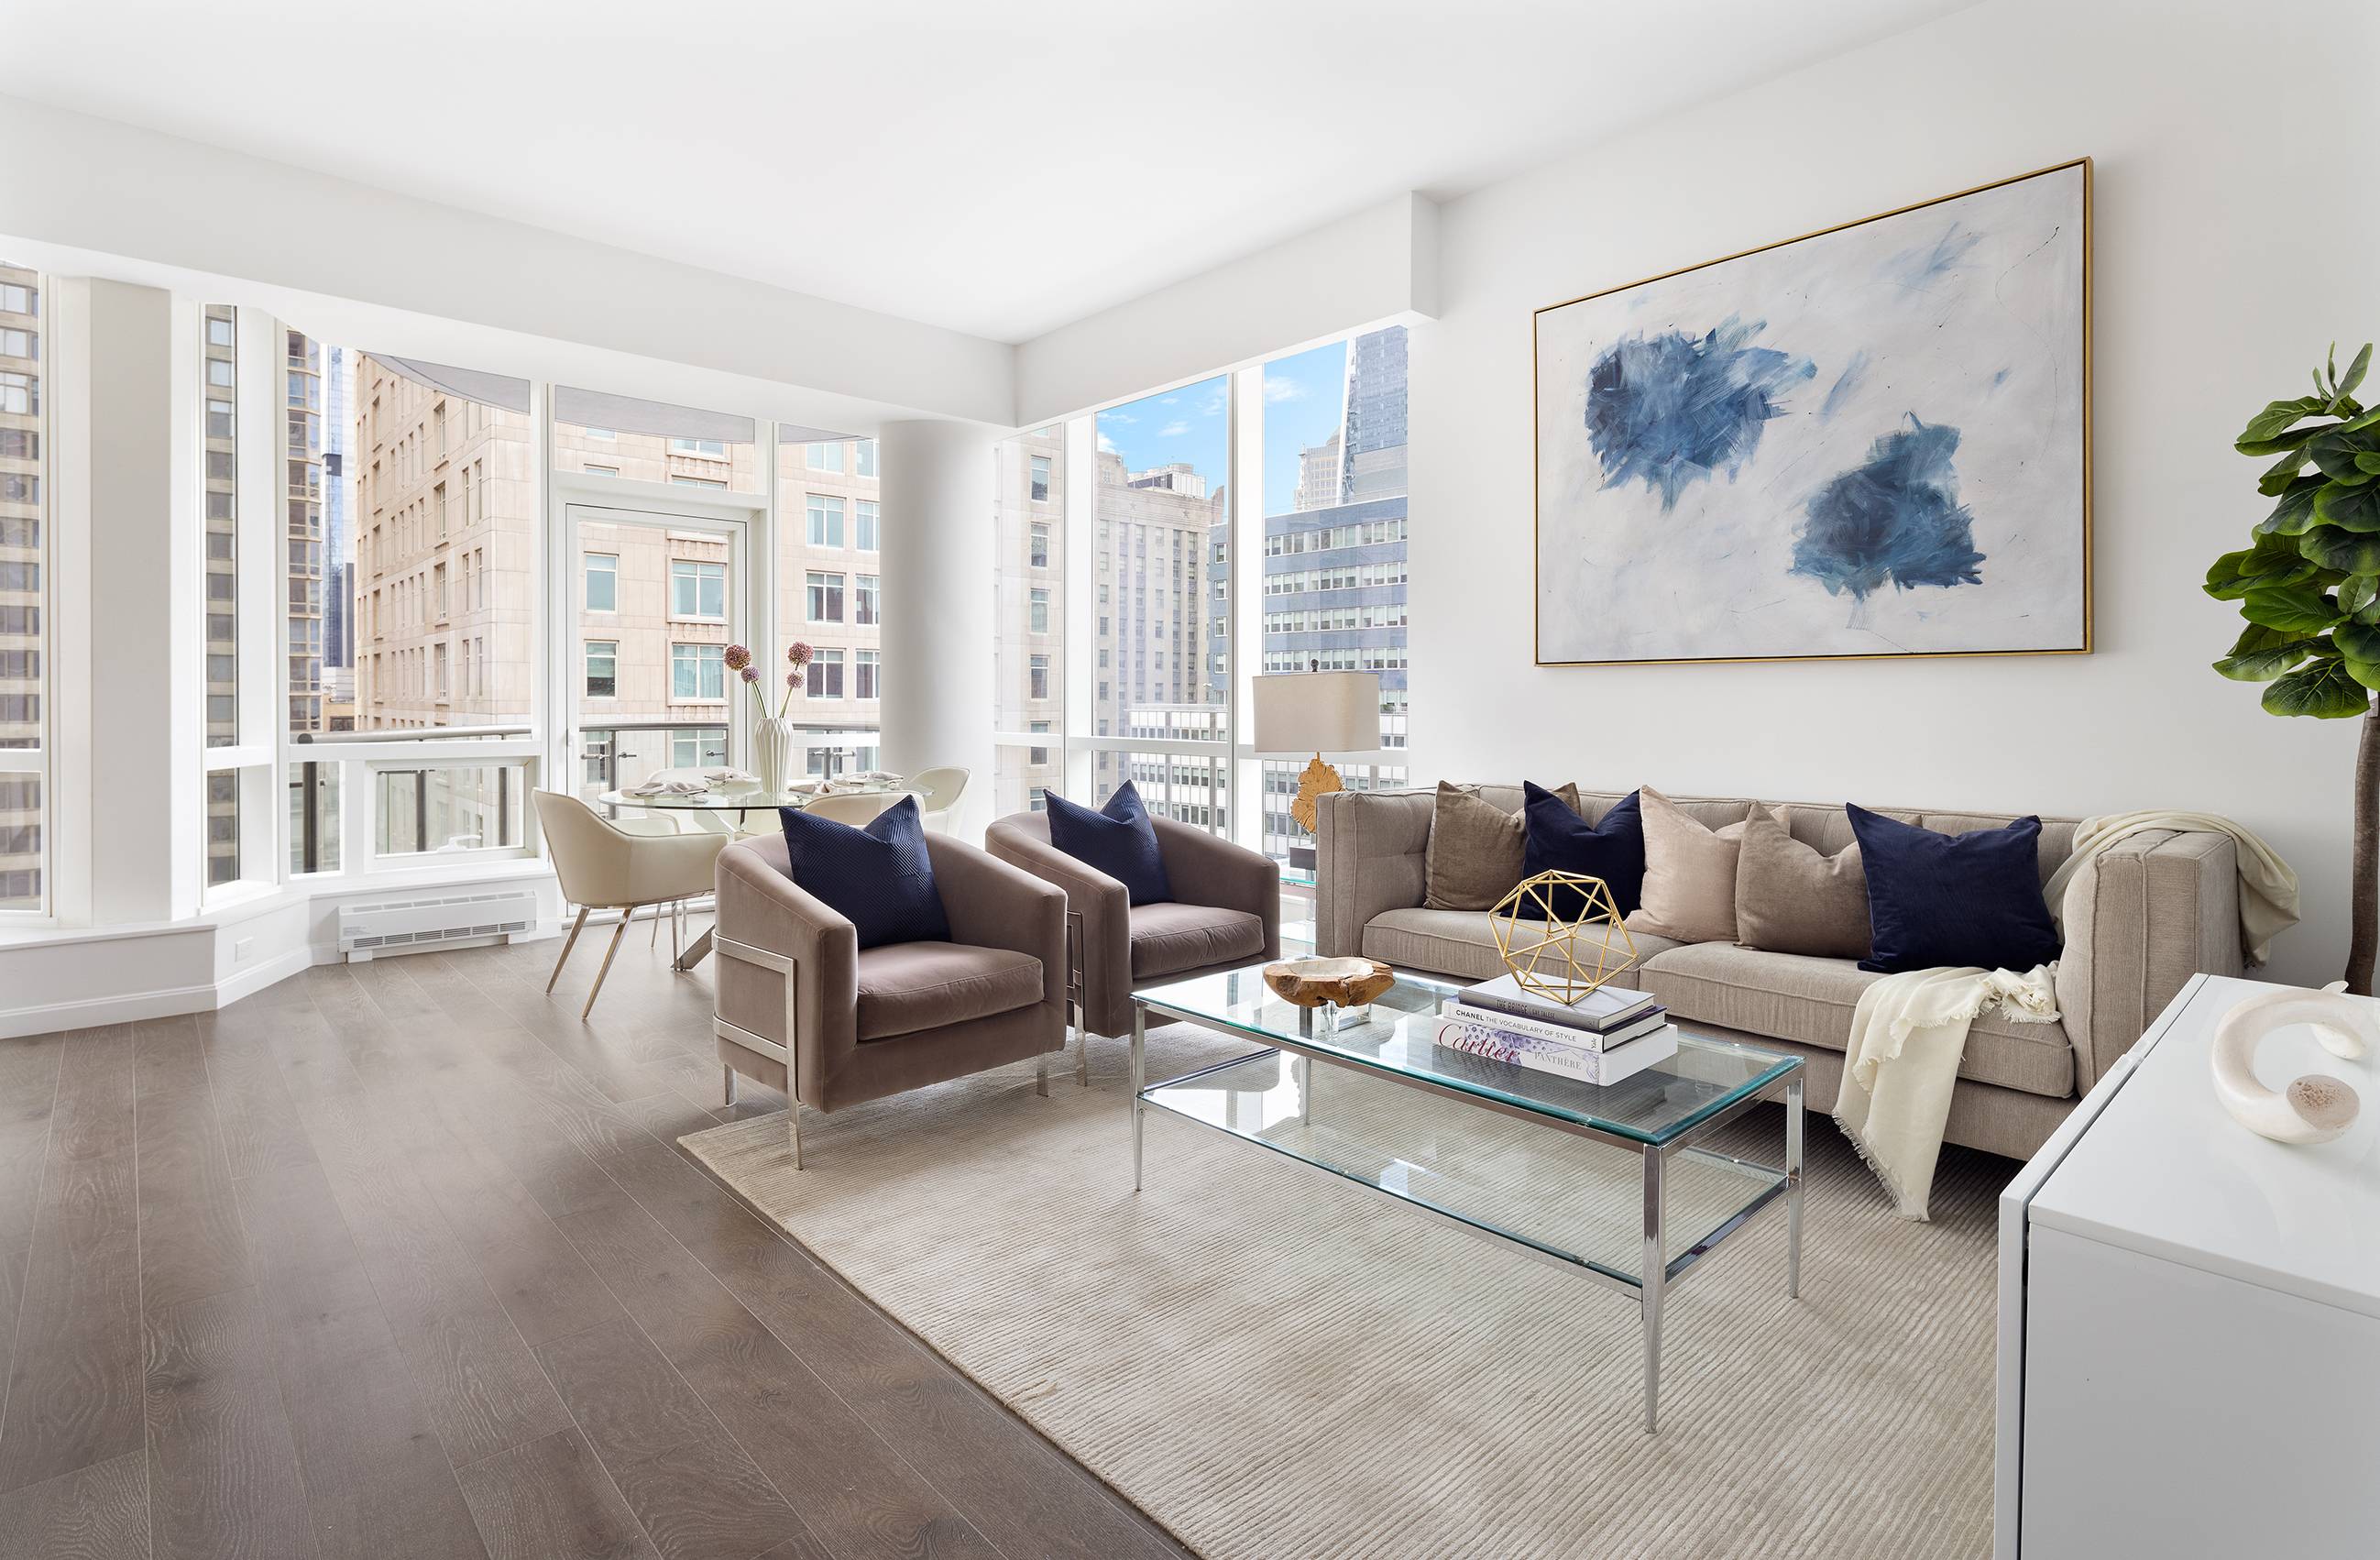 Welcome to this gleaming full floor loft at TriBeCa's newest luxury tower, a stunning 2 bedroom, 2 bathroom home suffused with Lower Manhattan views and northern and southern light.